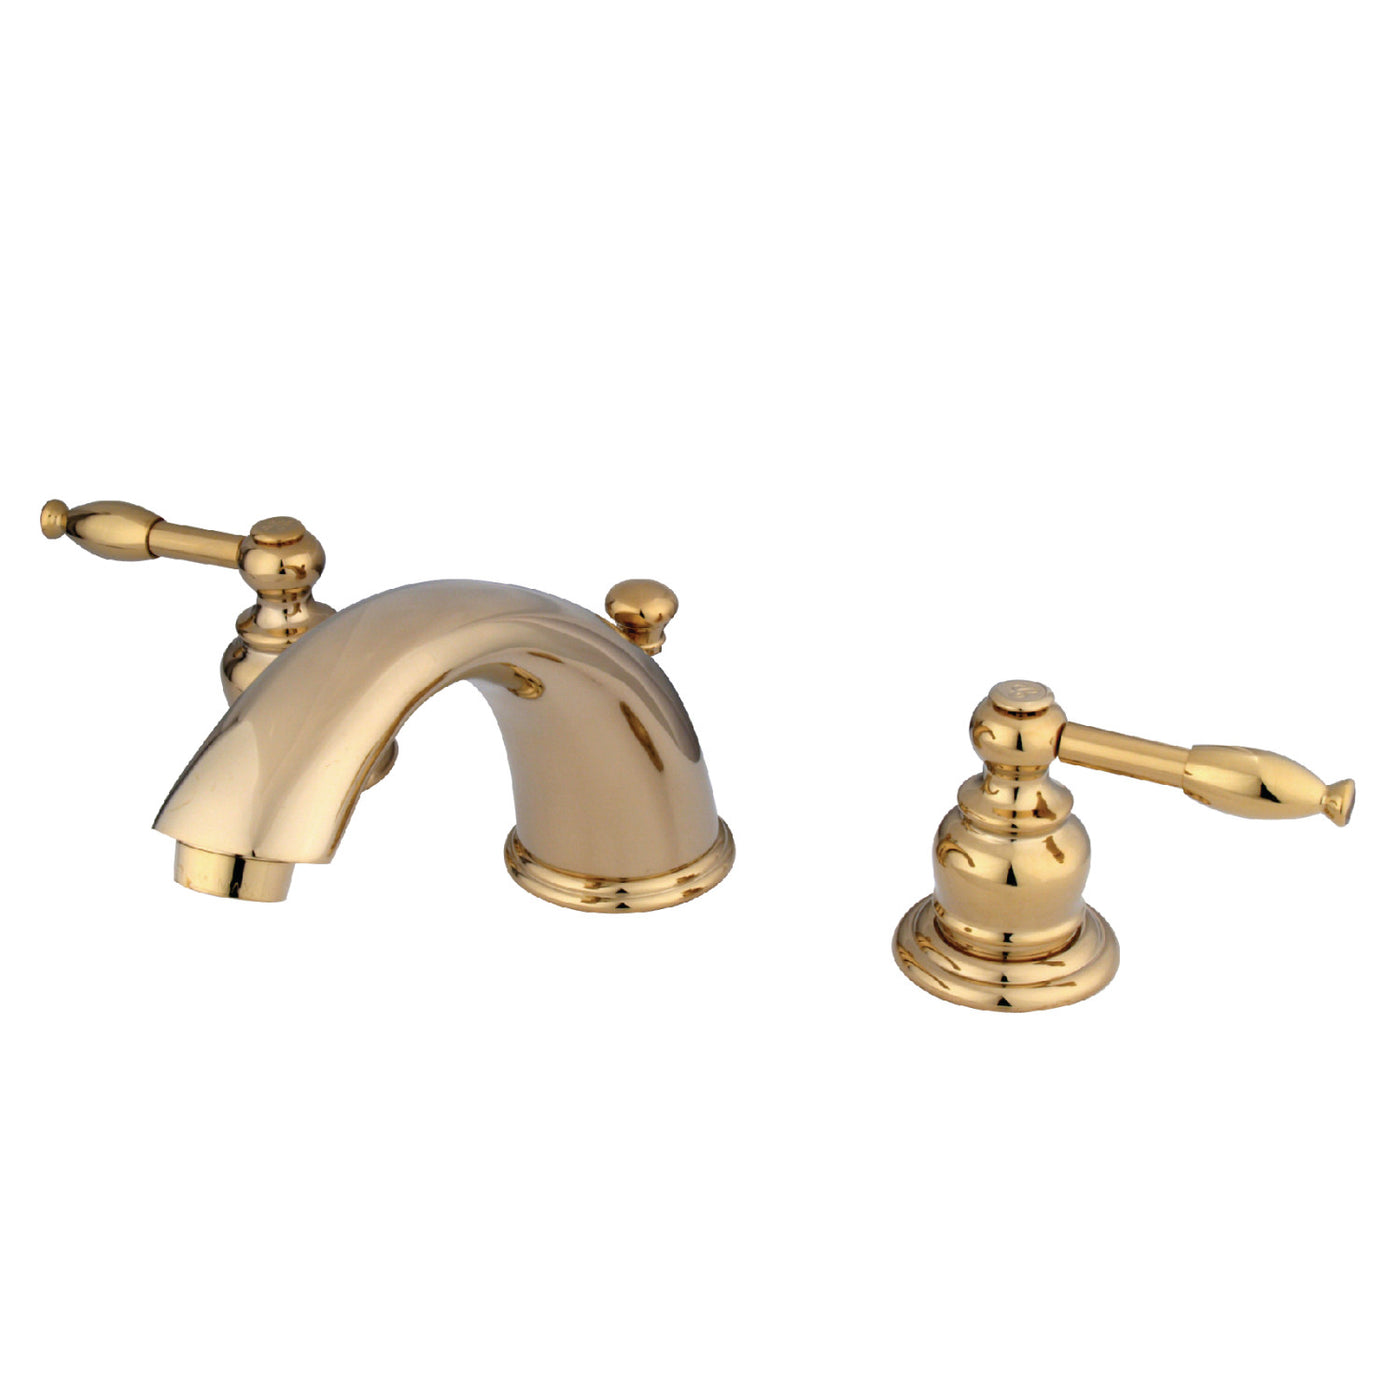 Elements of Design EB962KL Widespread Bathroom Faucet with Retail Pop-Up, Polished Brass